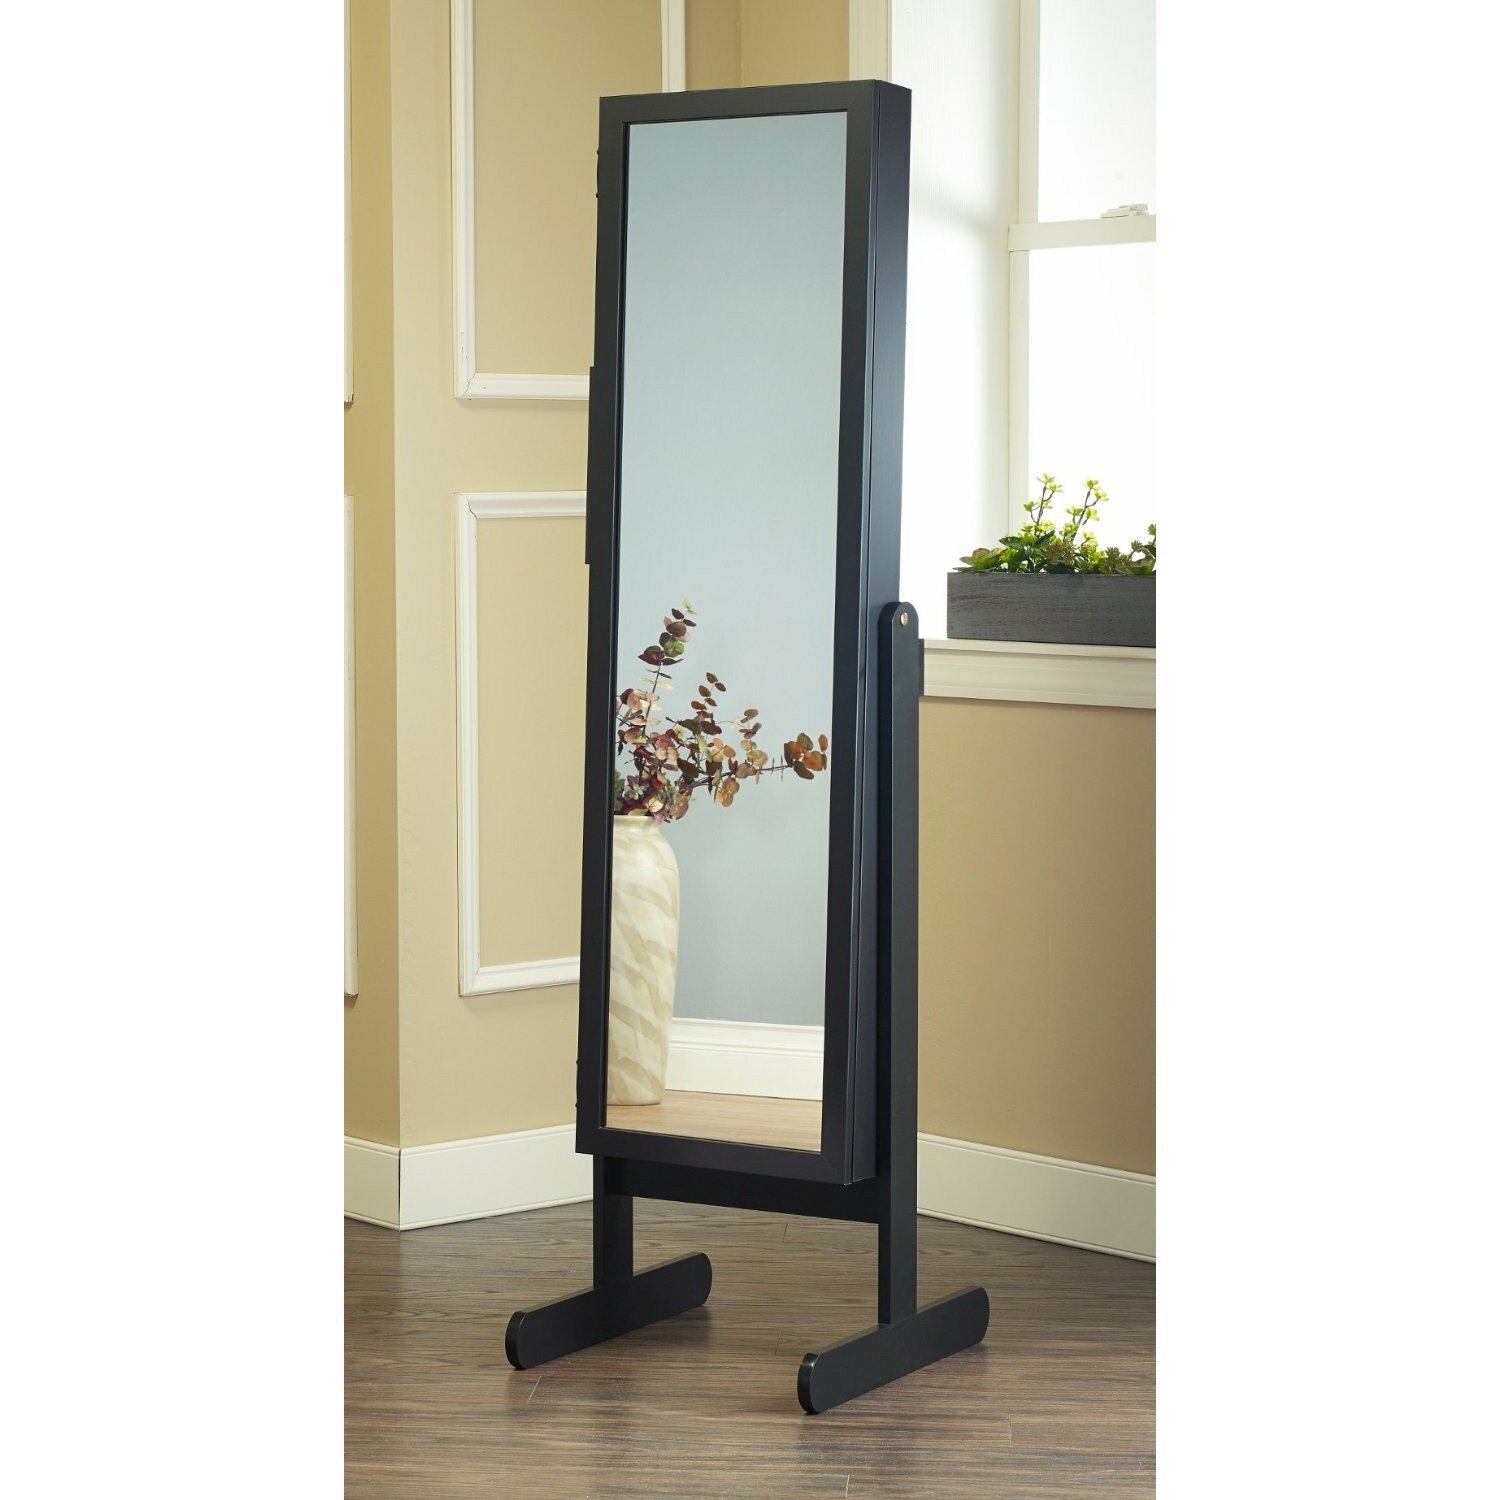 Mirrotek free standing jewelry armoire with mirror